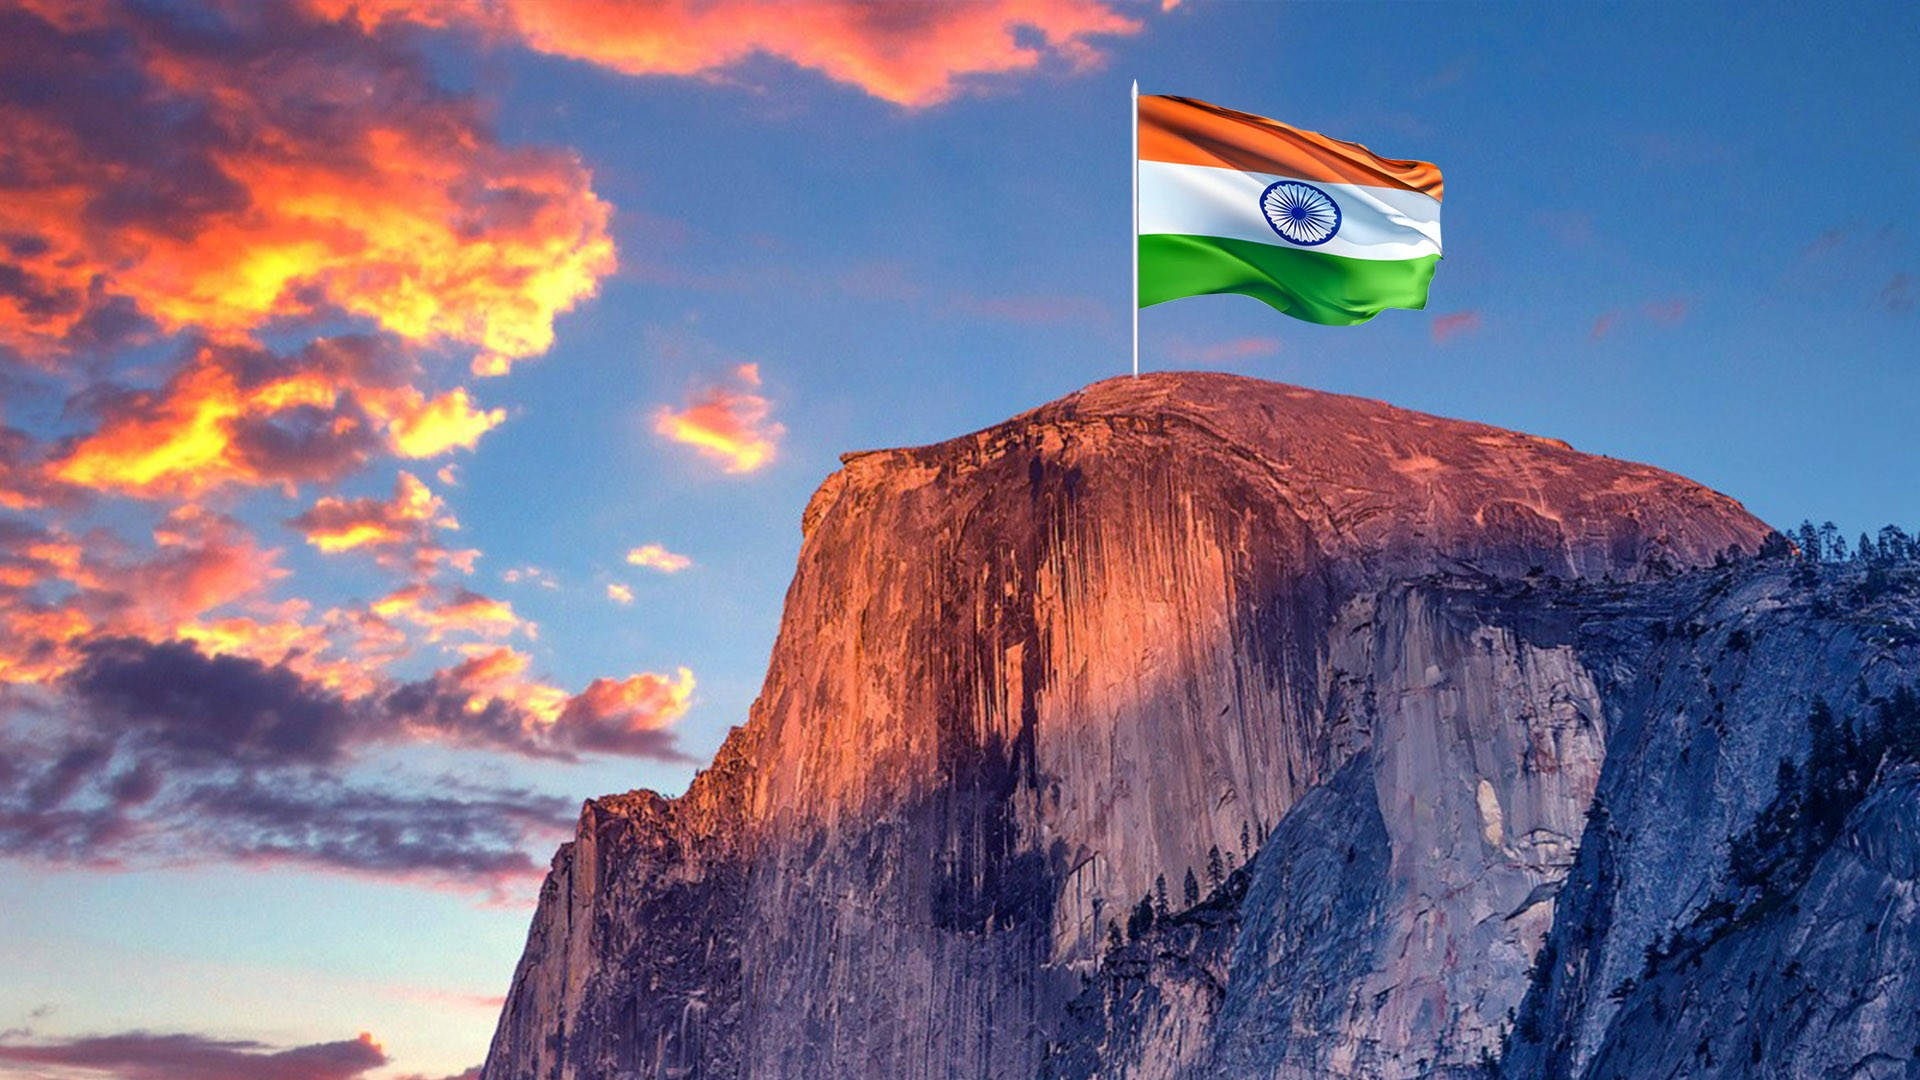 Download Mountain Top With Indian Flag Wallpaper 